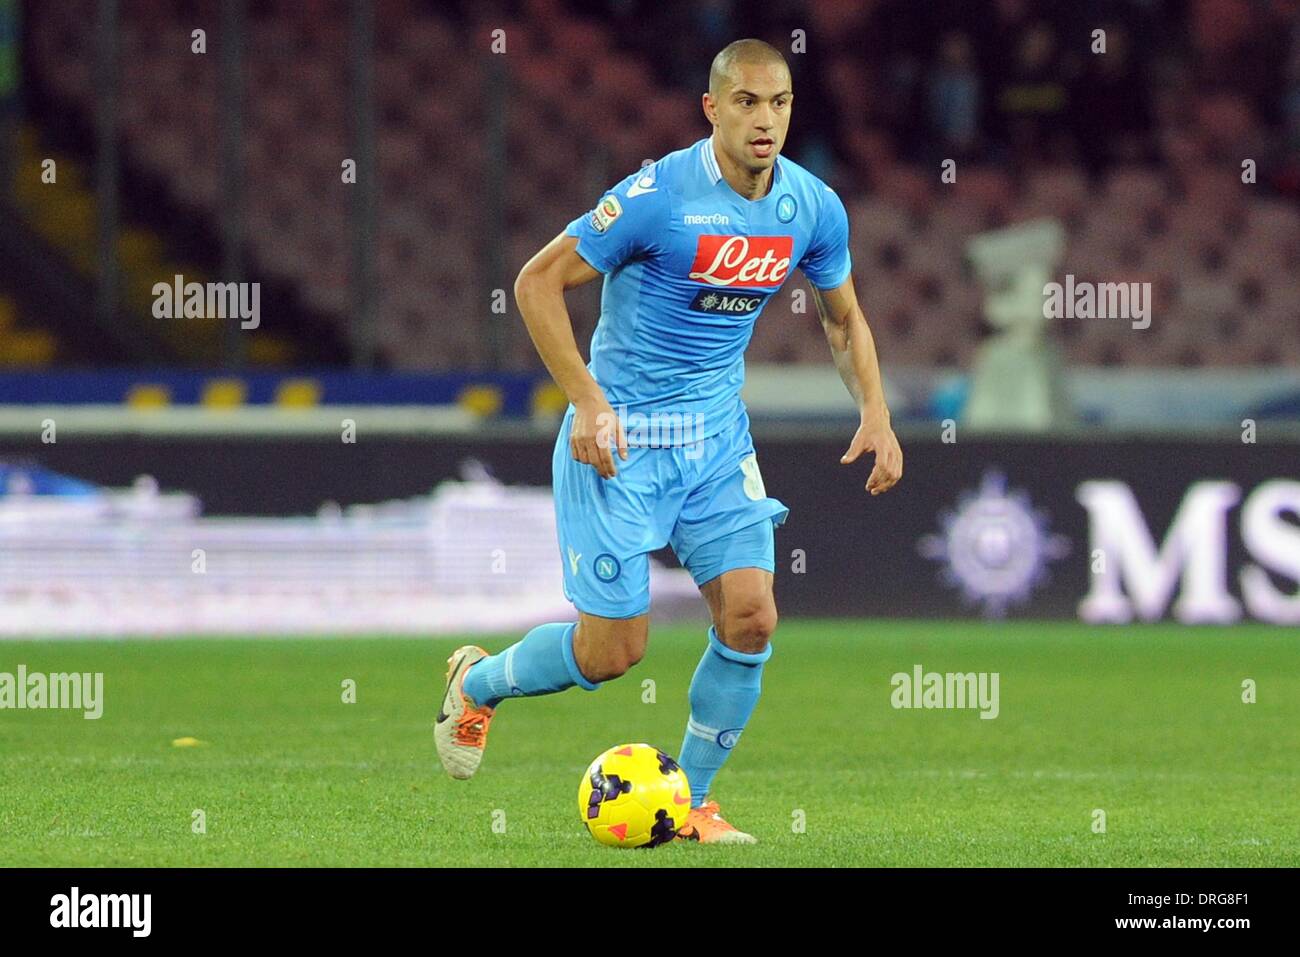 Naples, Italy. 25th Jan, 2014. Gokhan Inler of SSC Napoli in action during Football / Soccer : Italian Serie A match between SSC Napoli and AC Chievo Verona at Stadio San Paolo in Naples, Italy. Credit:  Franco Romano/Alamy Live News Stock Photo